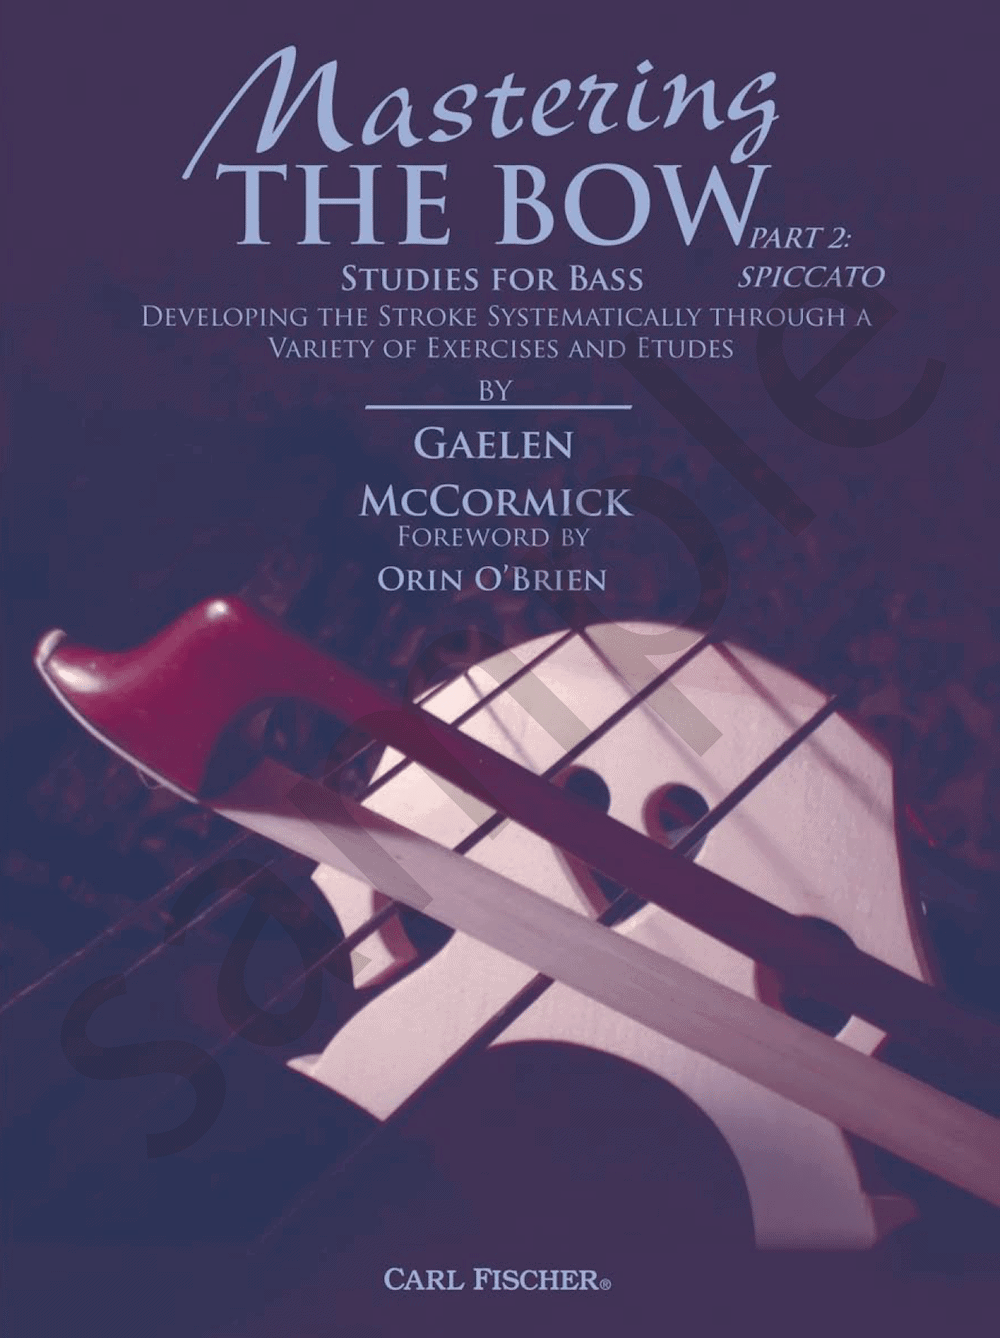 Mastering the Bow, Part 2 - Spiccato